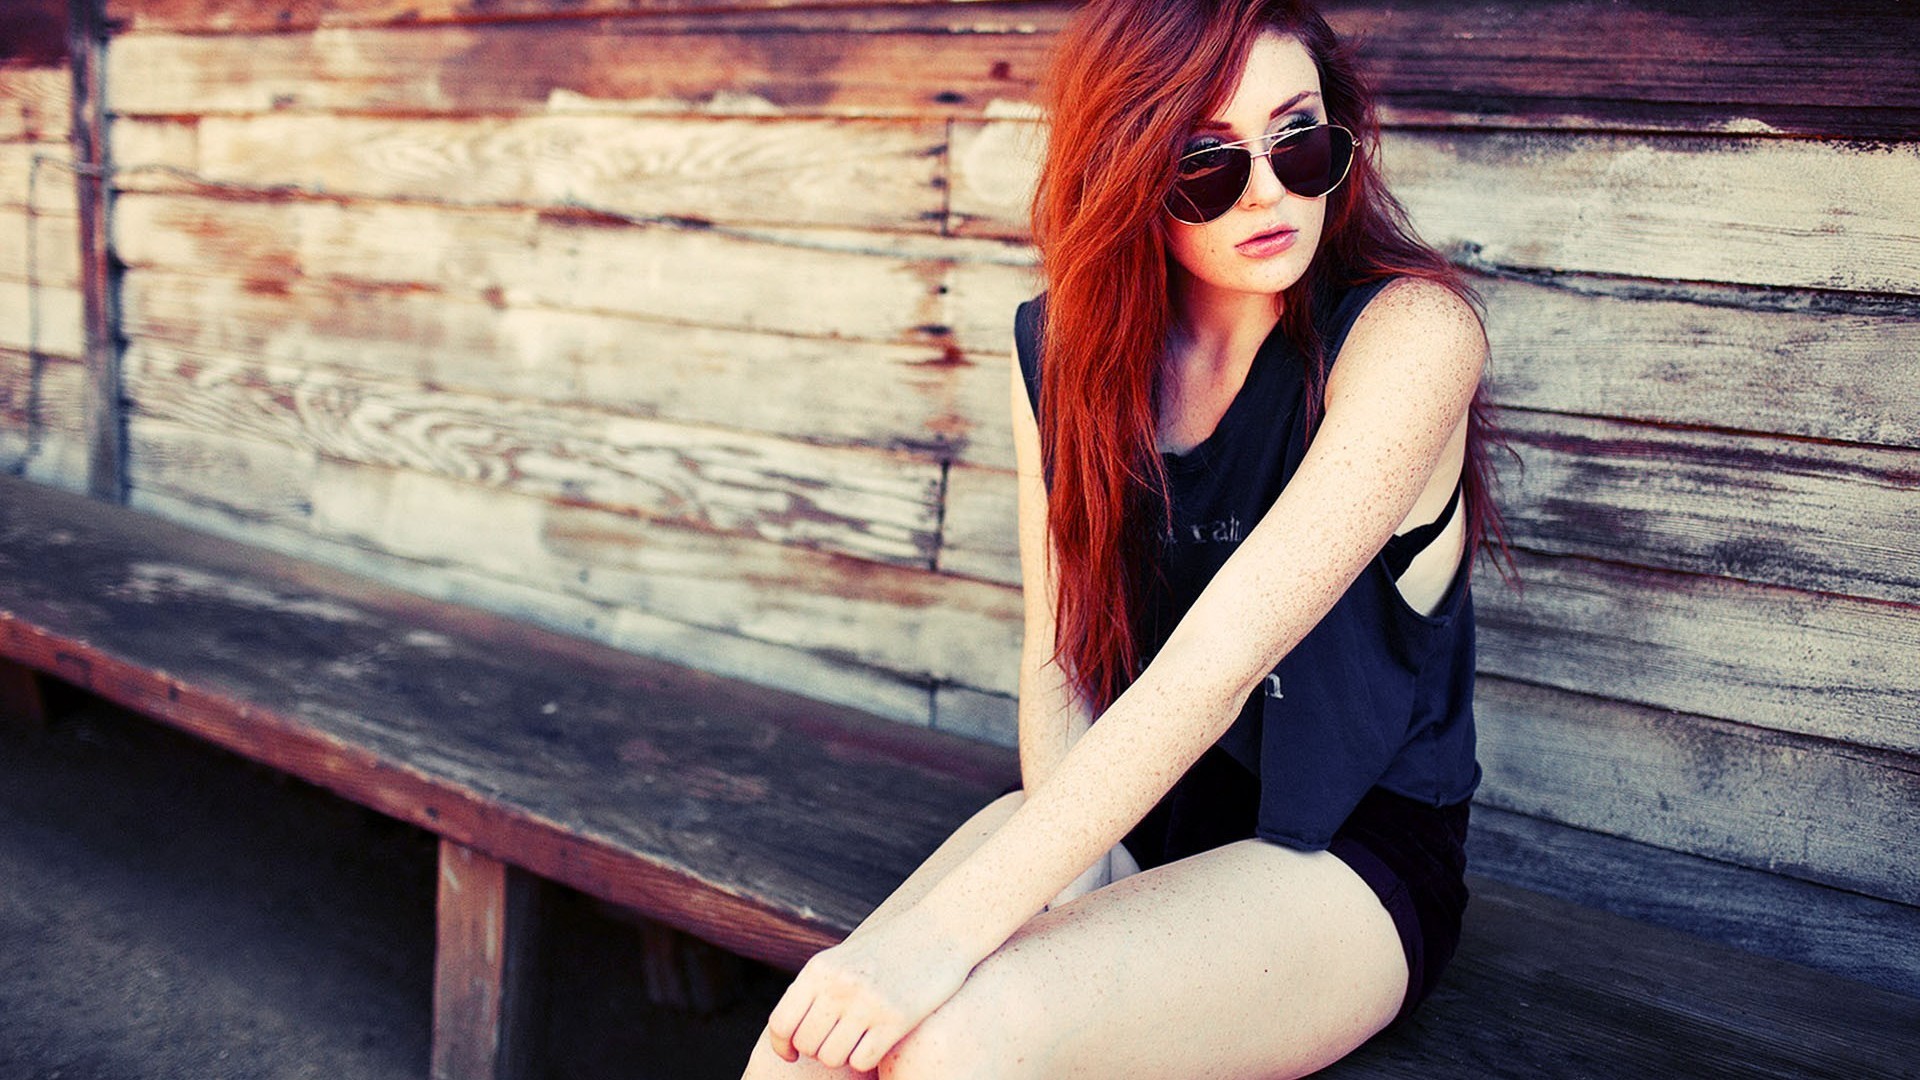 Redhead Women Sunglasses Bench On Bench Freckles Women With Shades 1920x1080